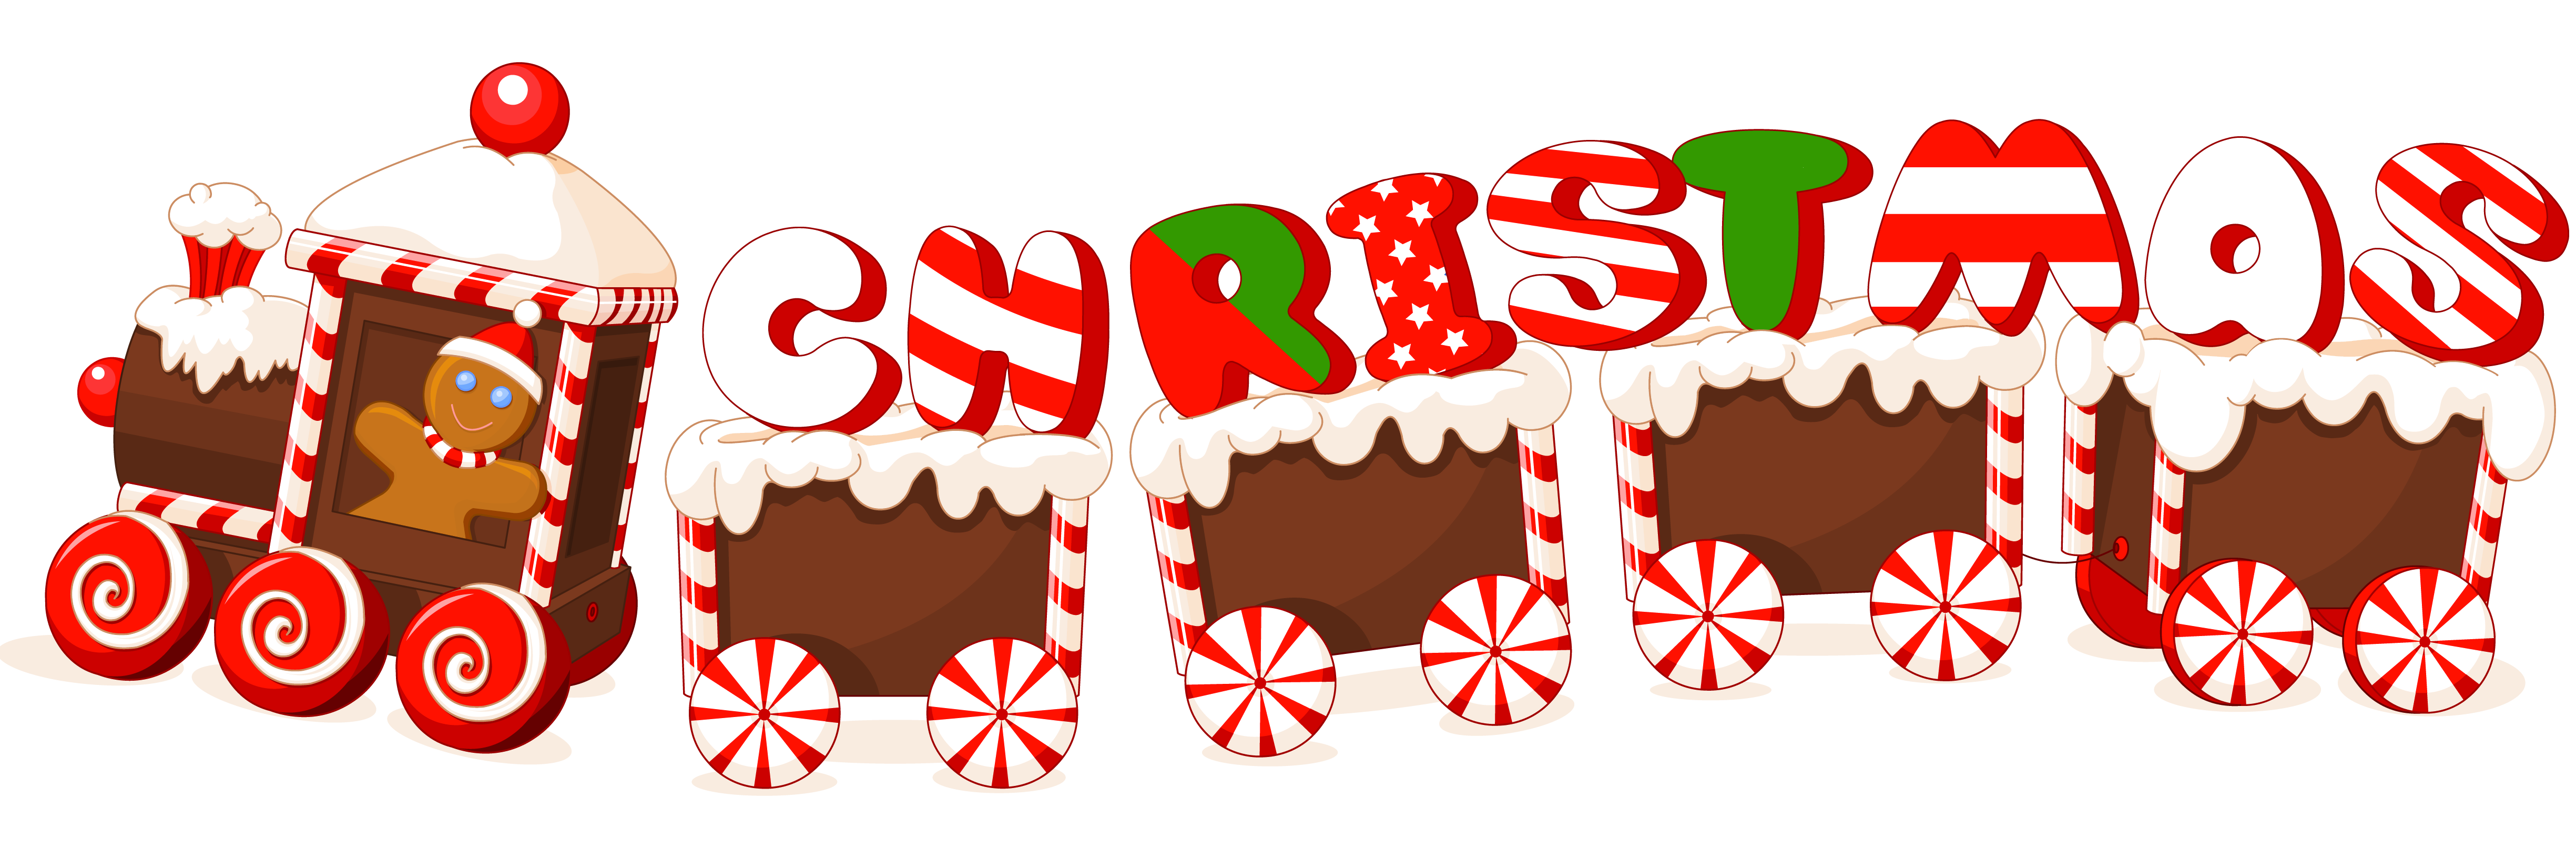 christmas clipart label - photo #29